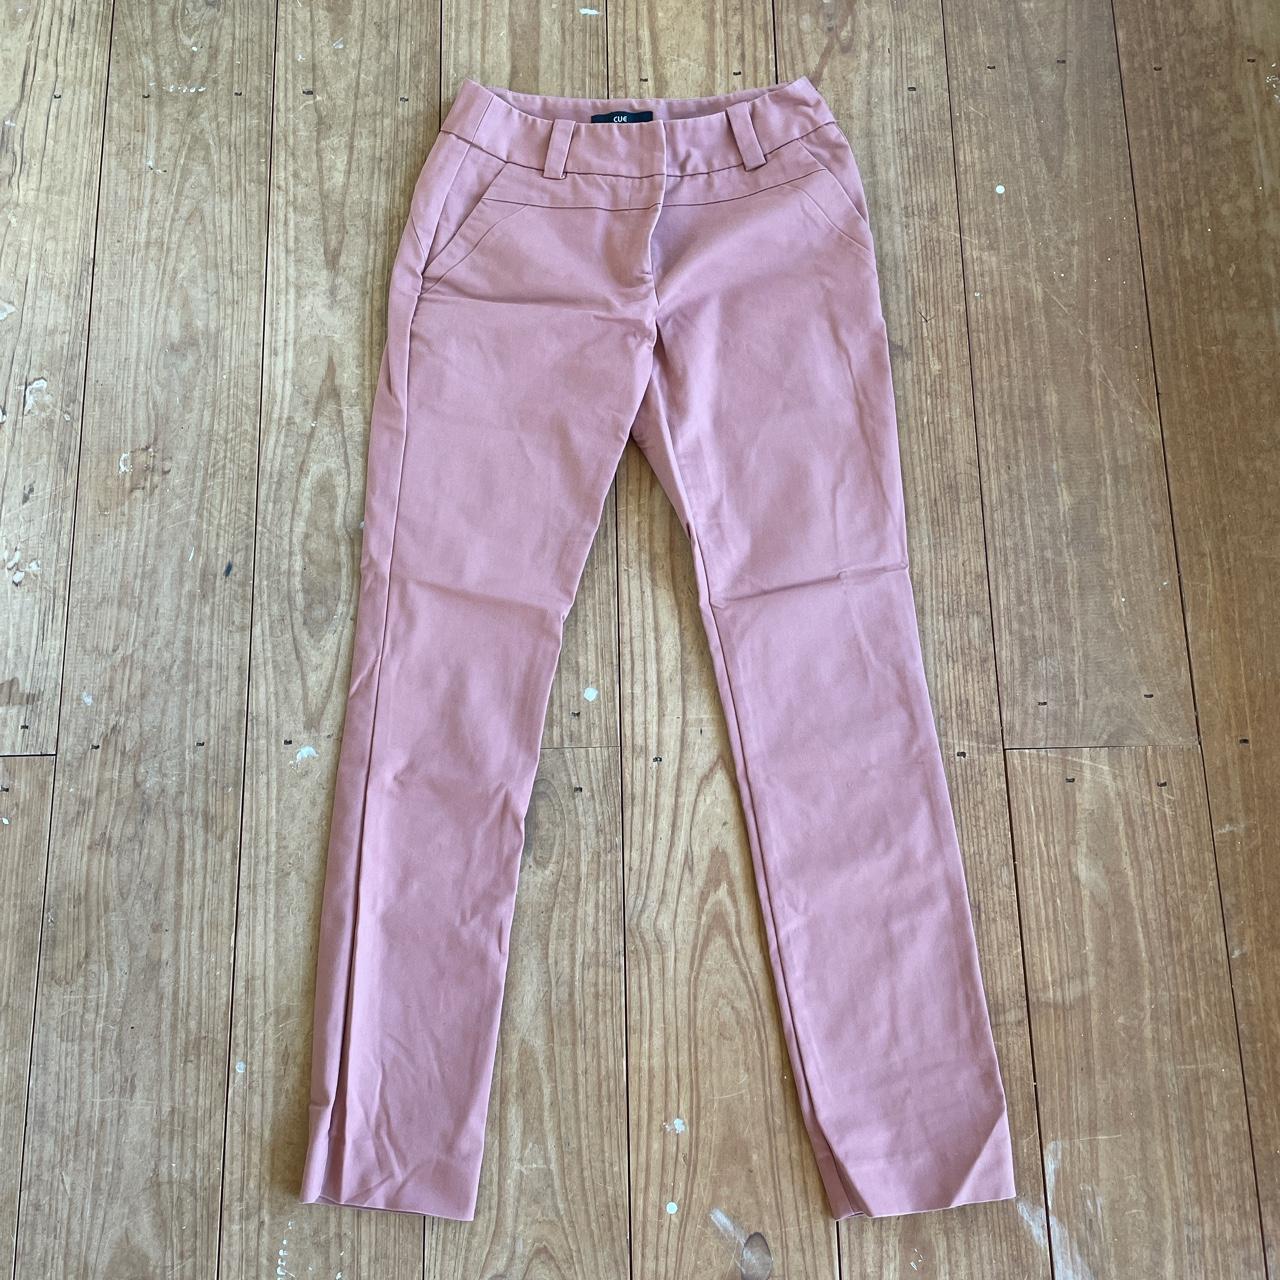 Cue causal pants or can be used for office attire.... - Depop